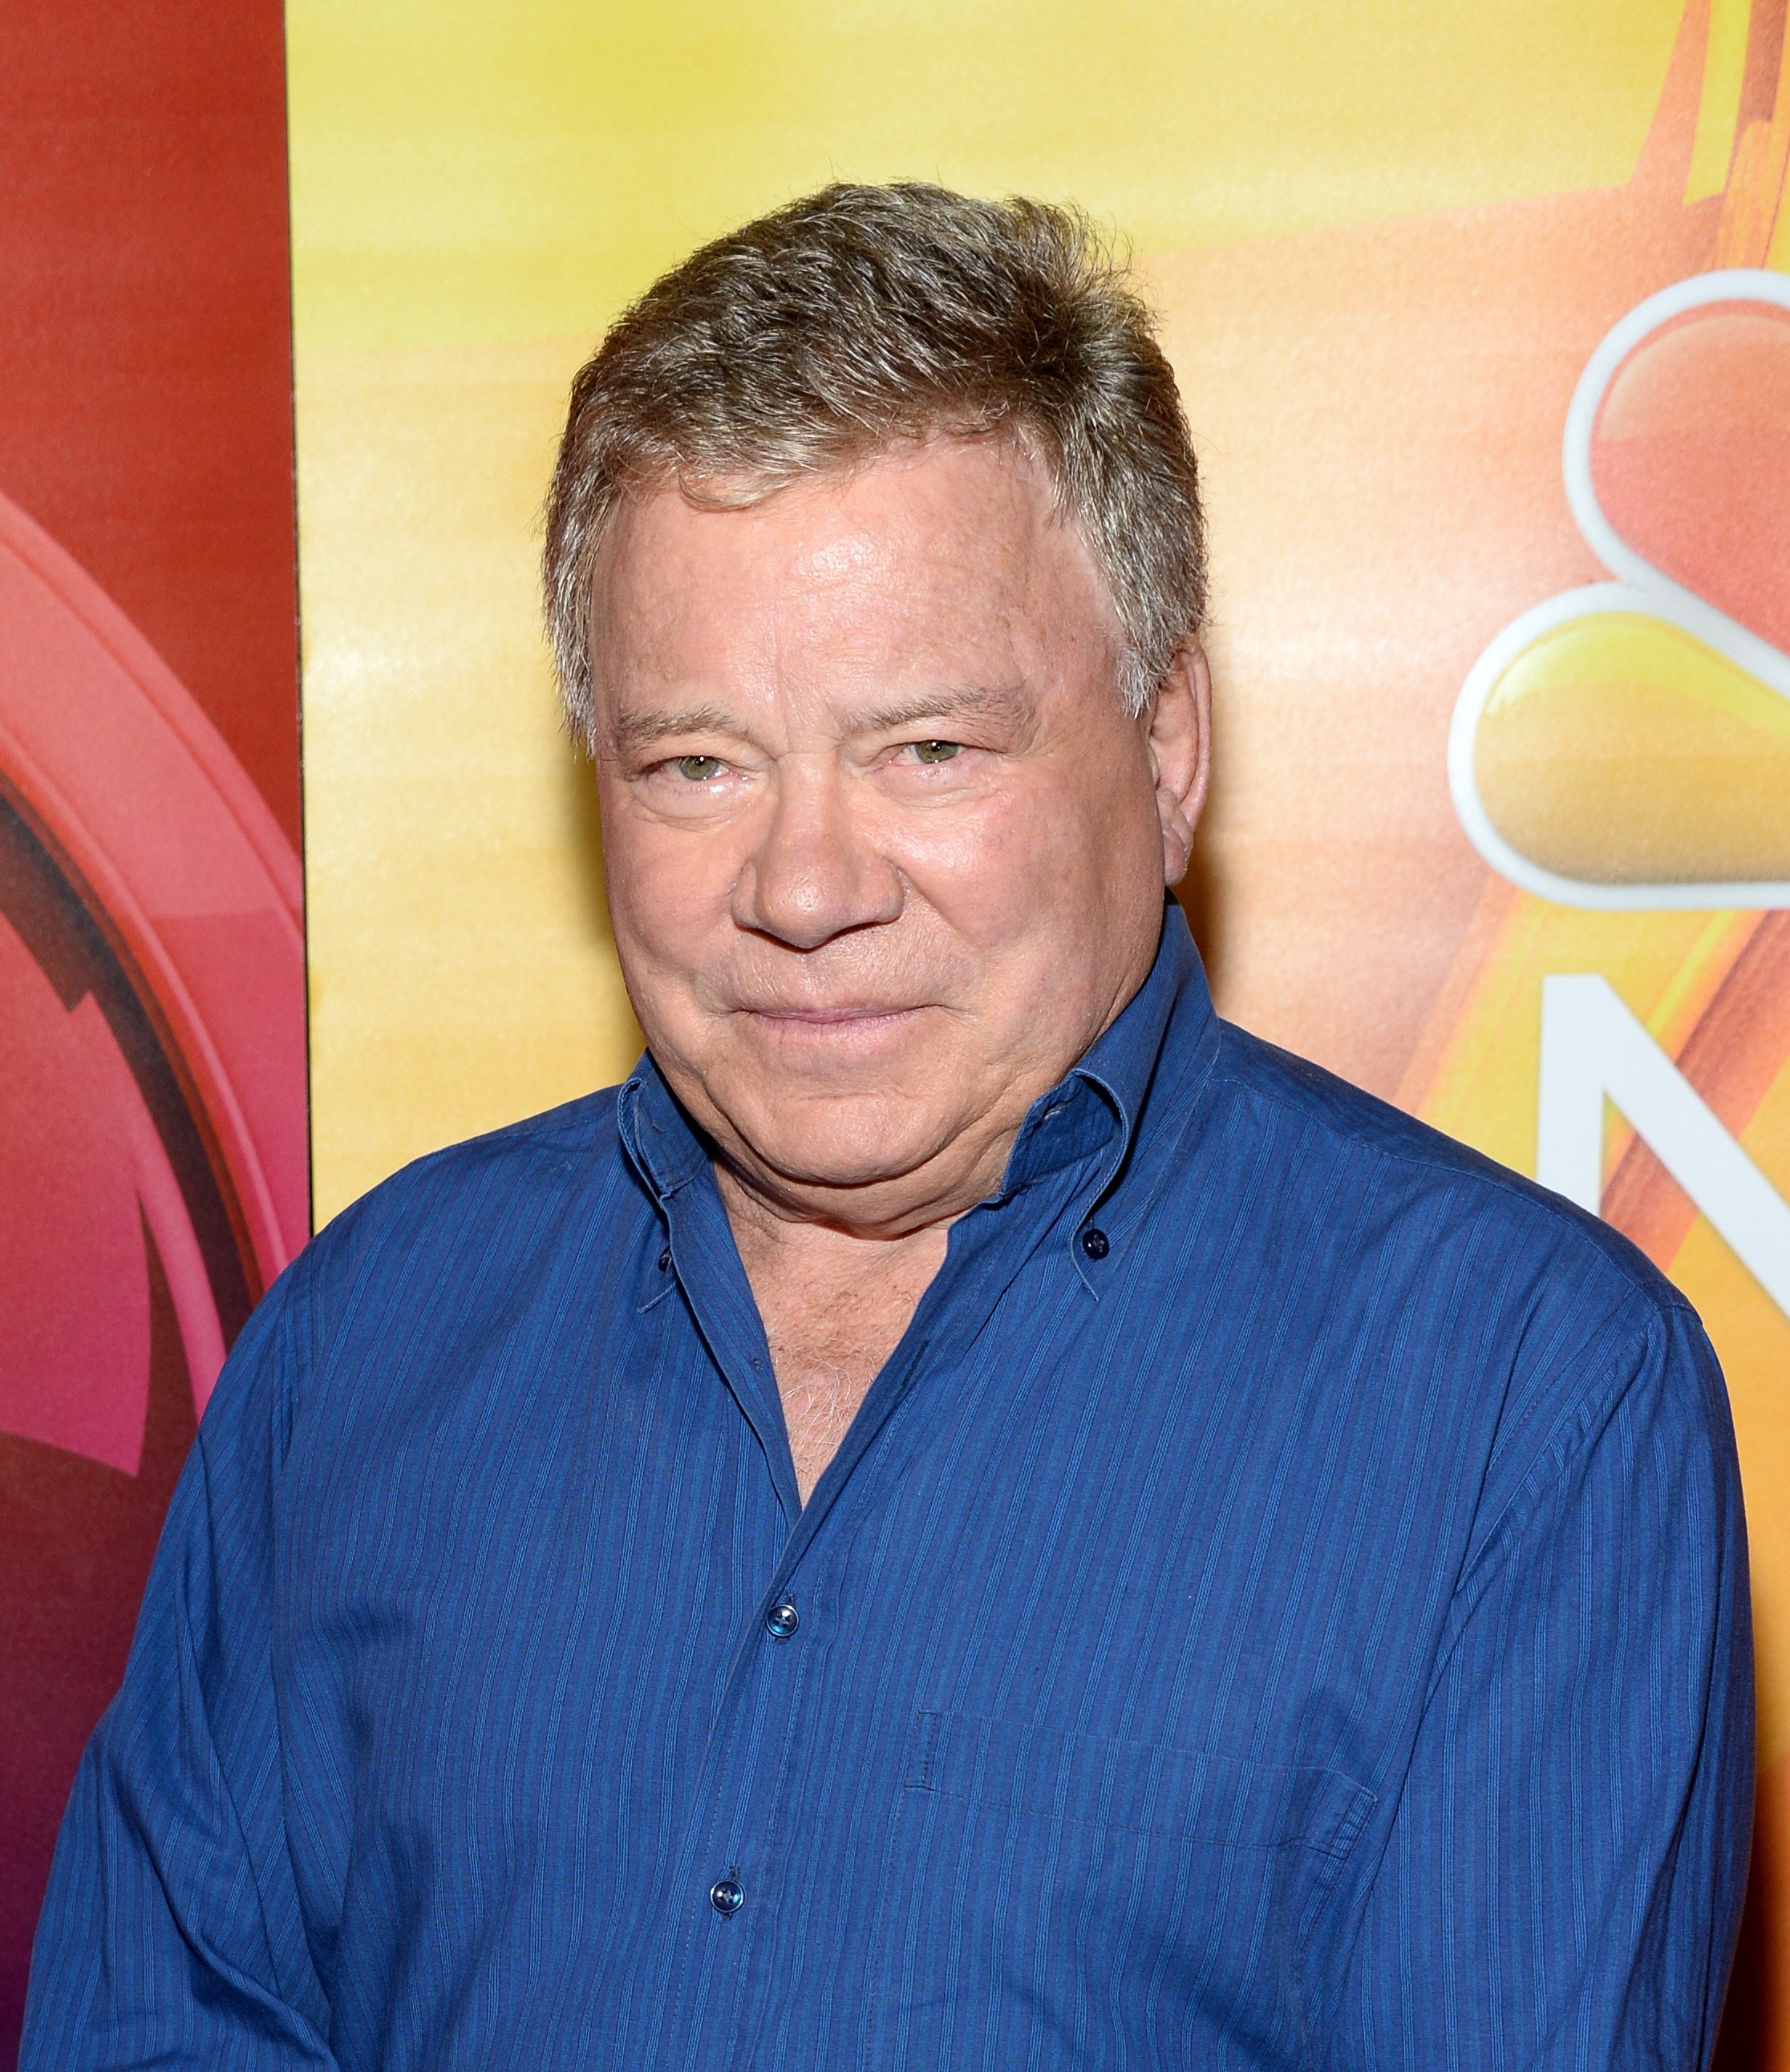 William Shatner attends the NBCUniversal press day during the 2016 Summer TCA Tour at The Beverly Hilton Hotel on August 2, 2016 | Photo: GettyImages